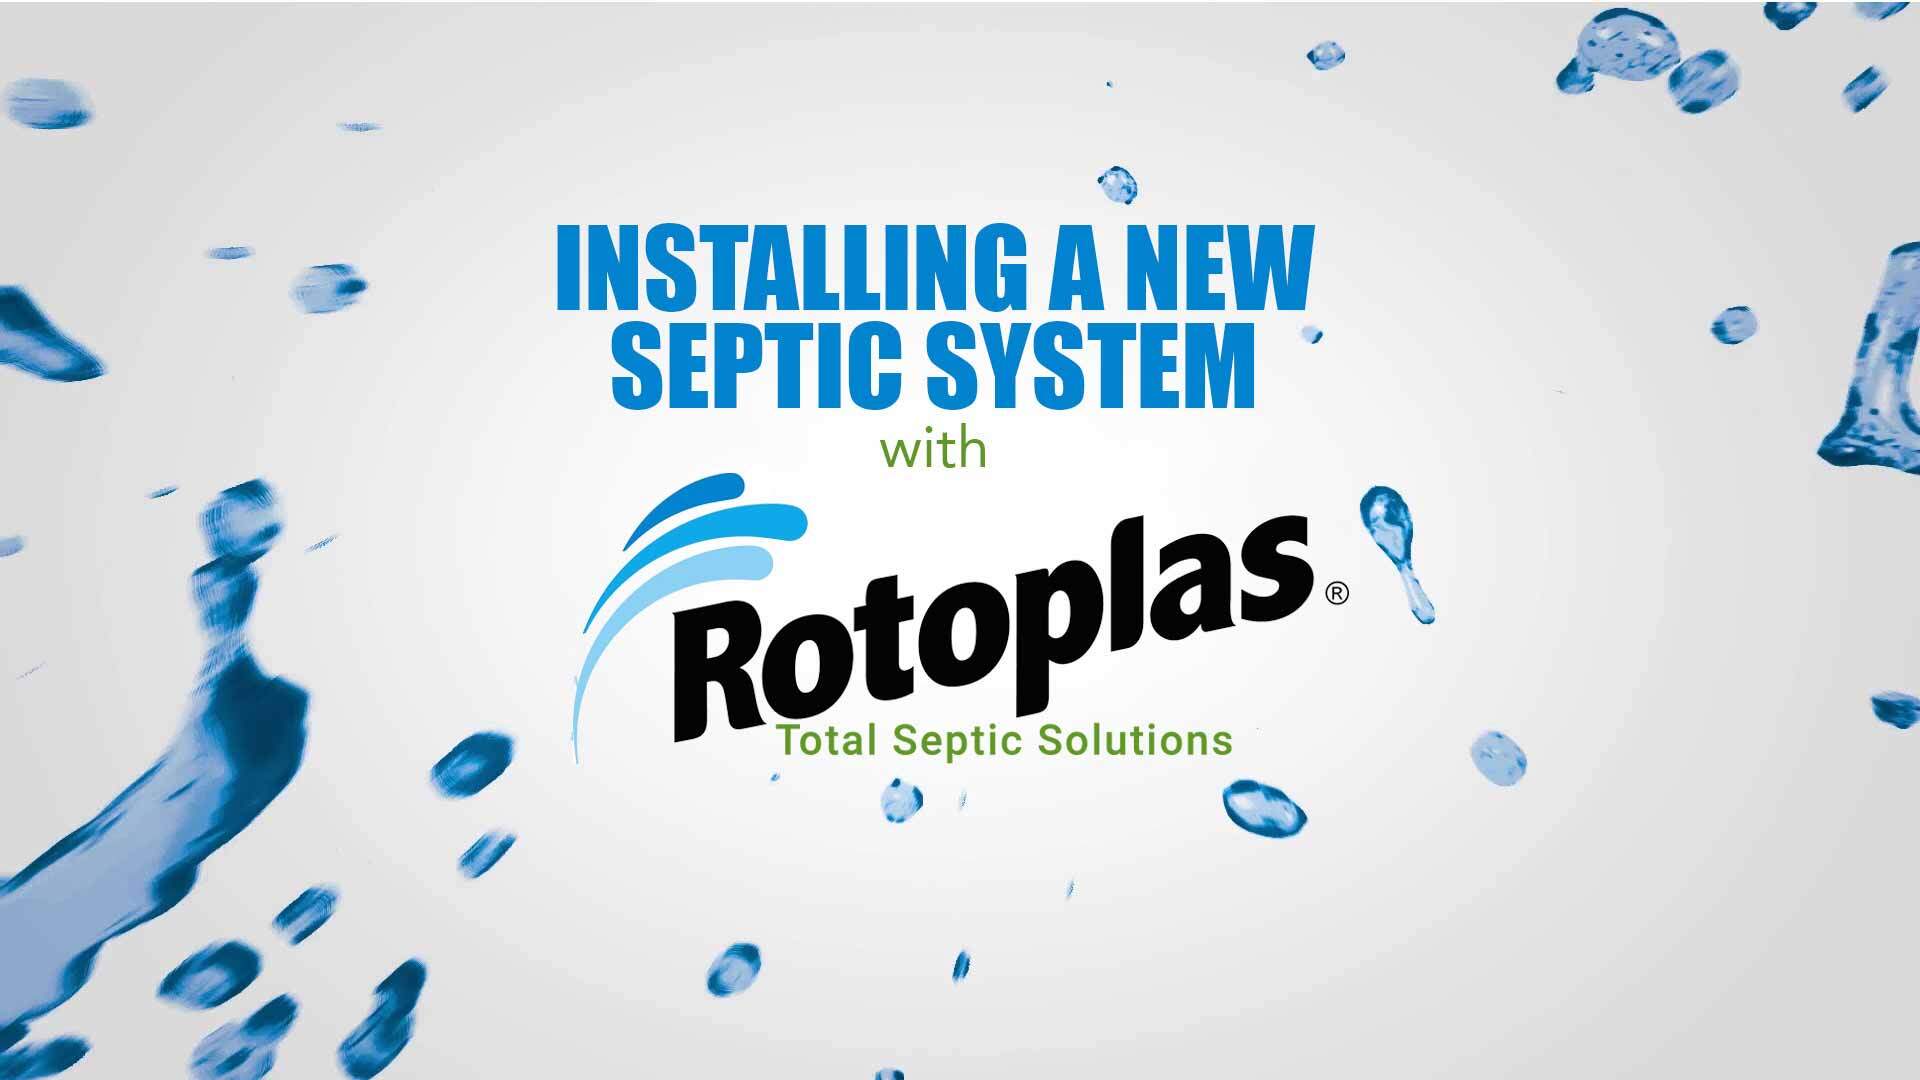 Rotoplas-Total Septic Solutions